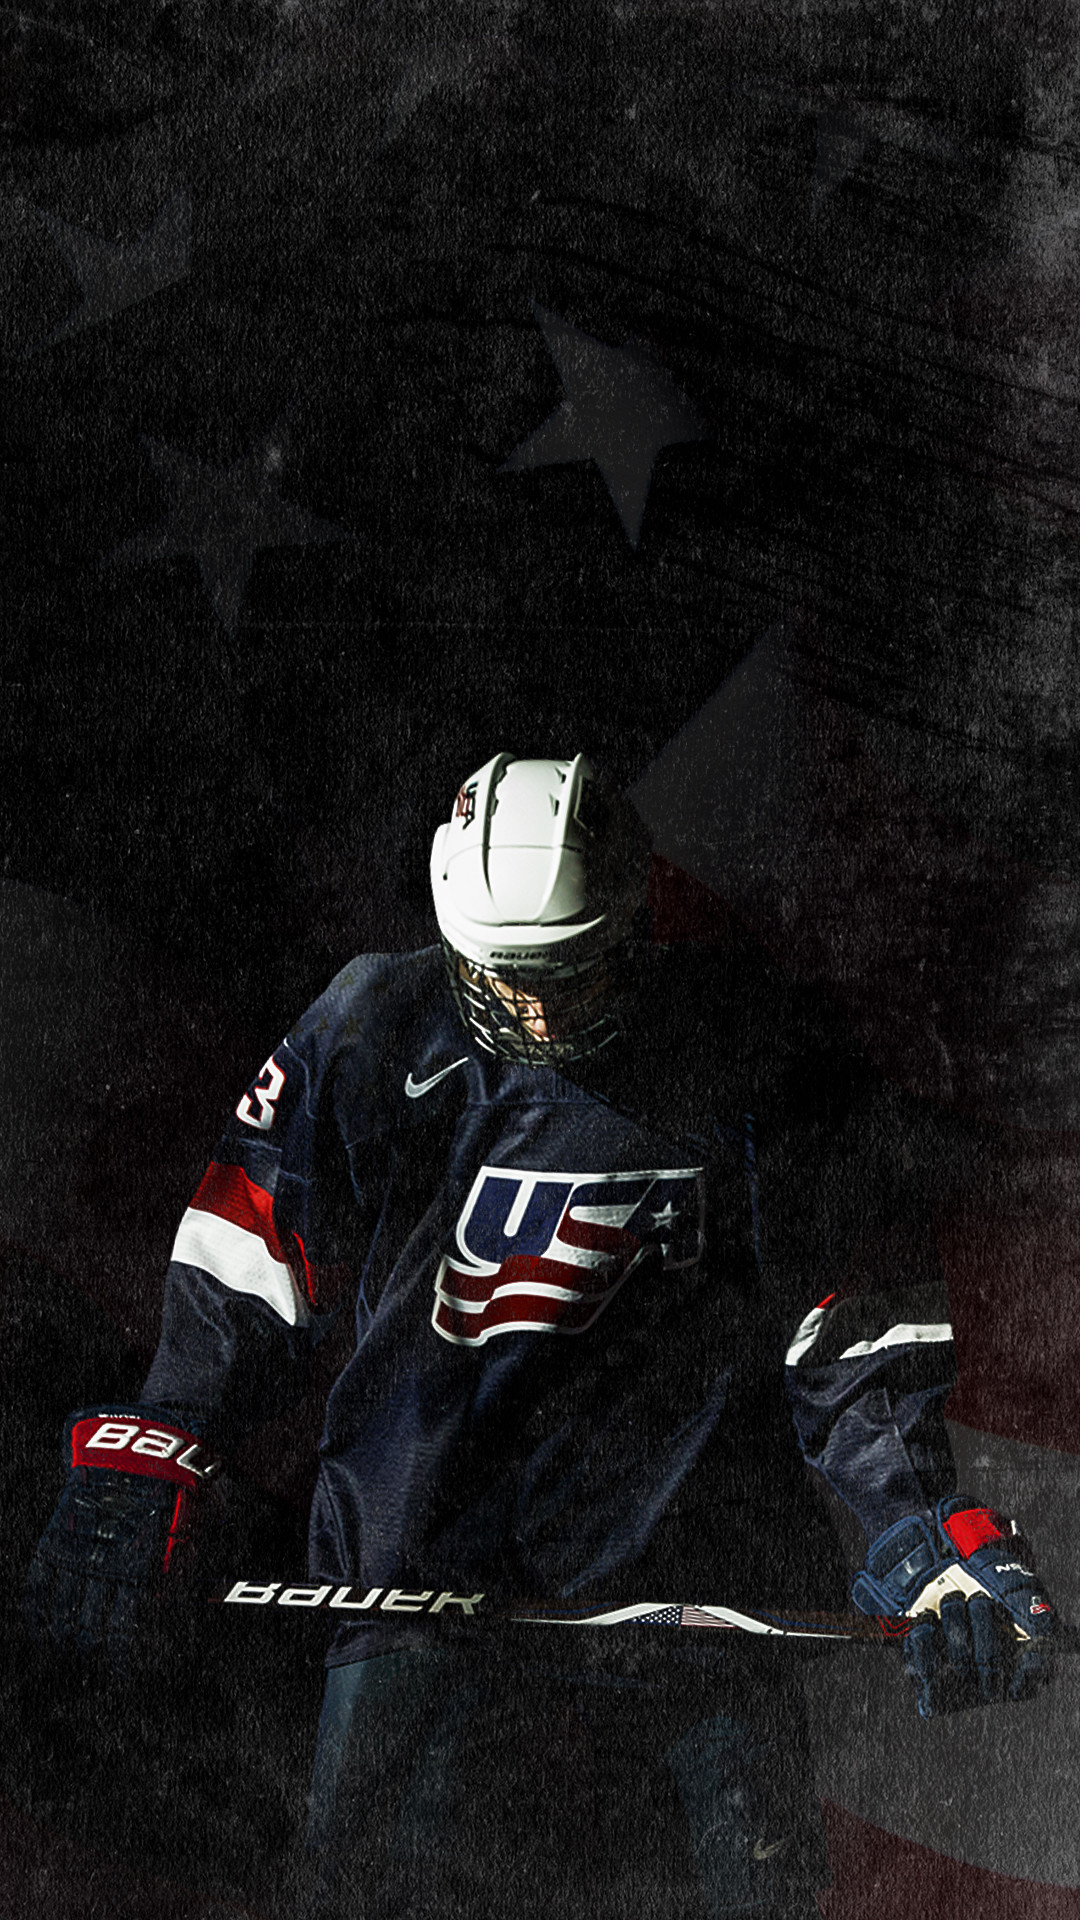 Cool Hockey Backgrounds (75+ images)